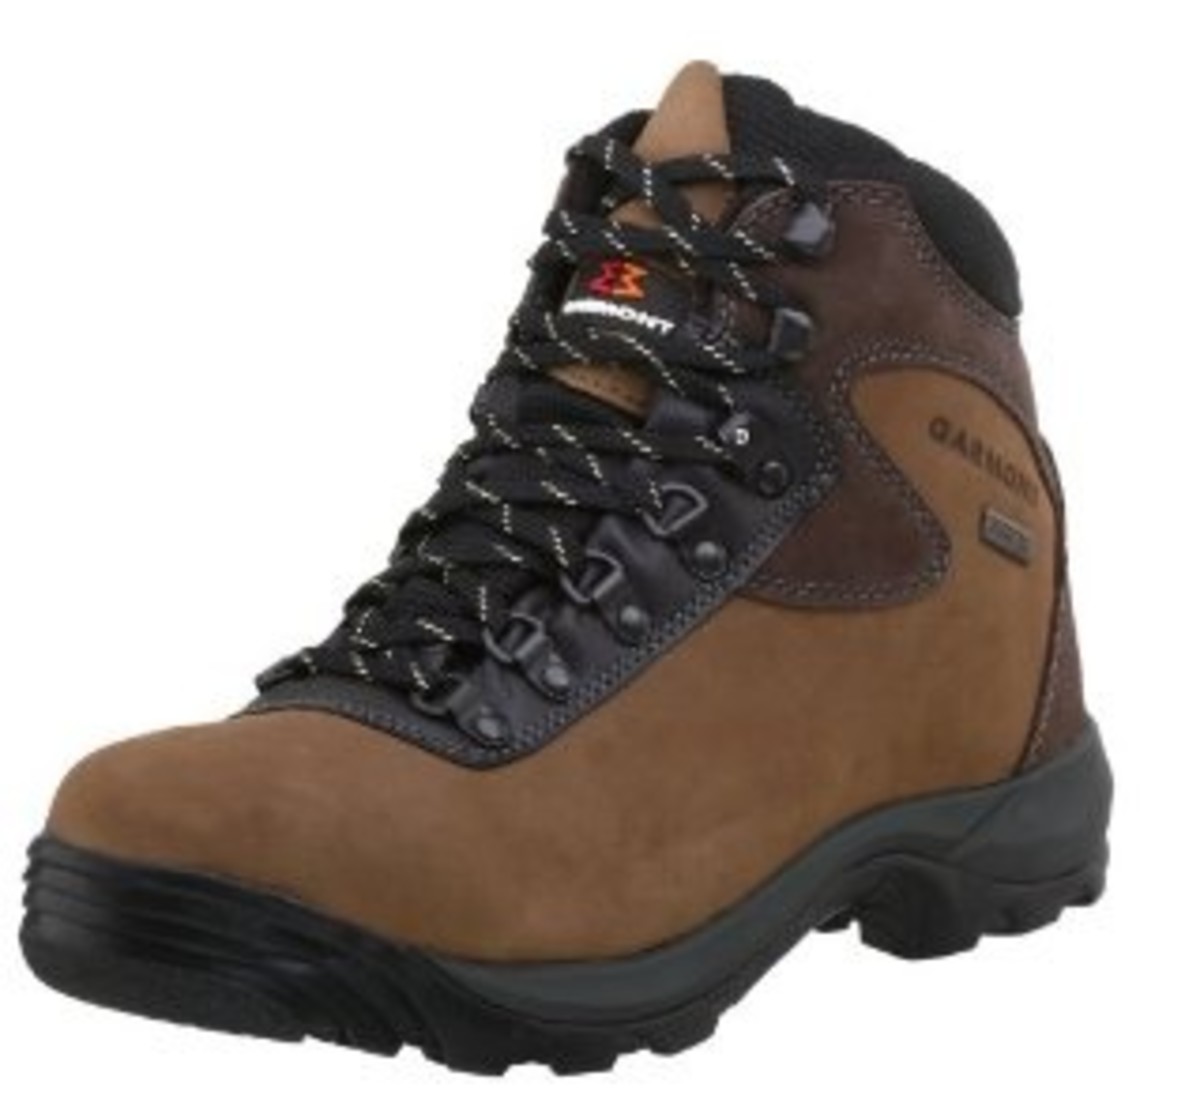 garmont-hiking-boots-guide-reviews-prices-buy-online